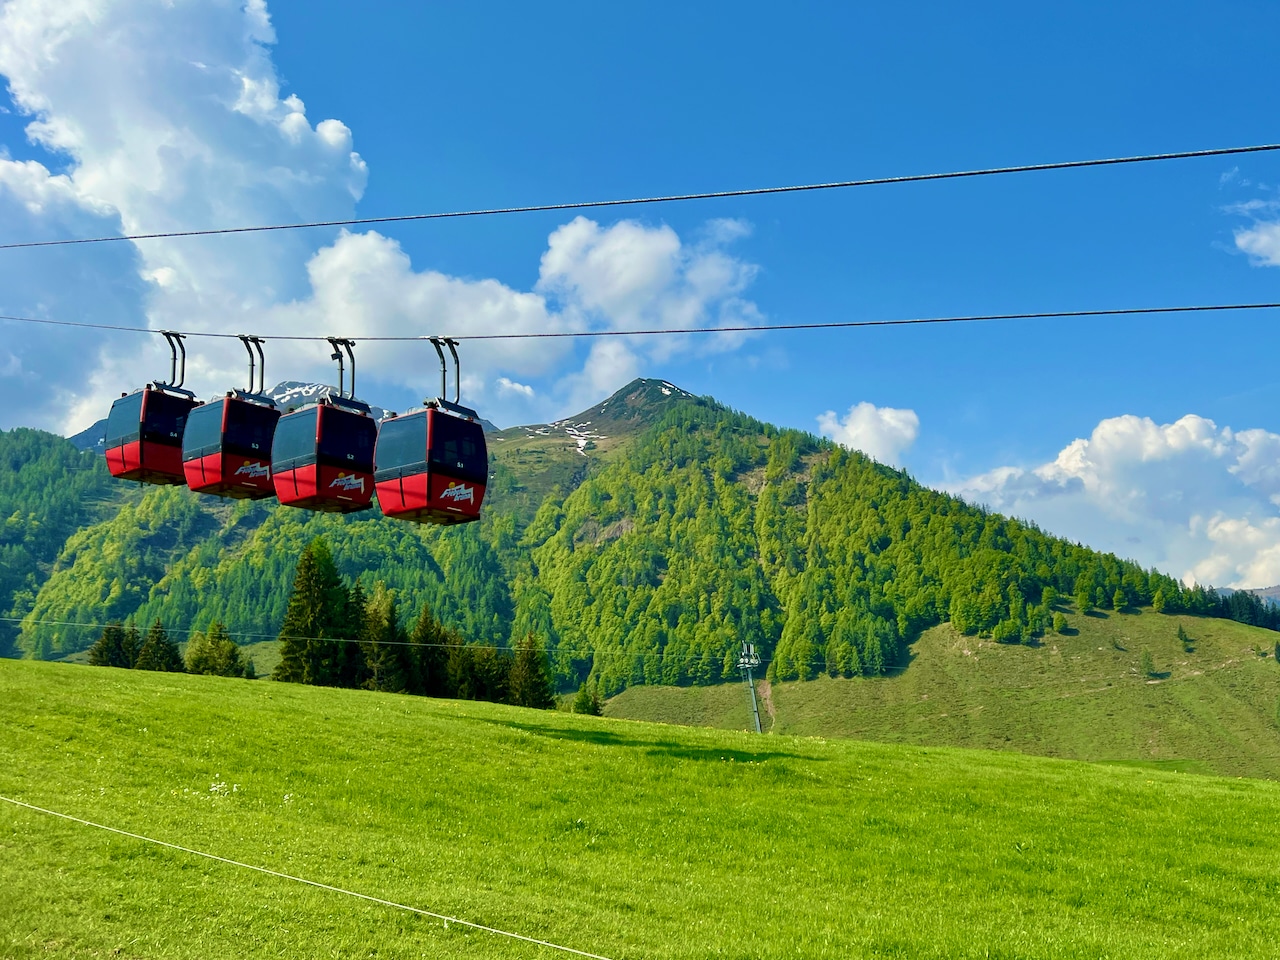 I am very pleased to be able to share my enthusiasm for hiking in Fieberbrunn and the PillerseeTal with you through this blog post. The experience of riding the gondolas is always an incomparable adventure for me. Photo: Sascha Tegtmeyer